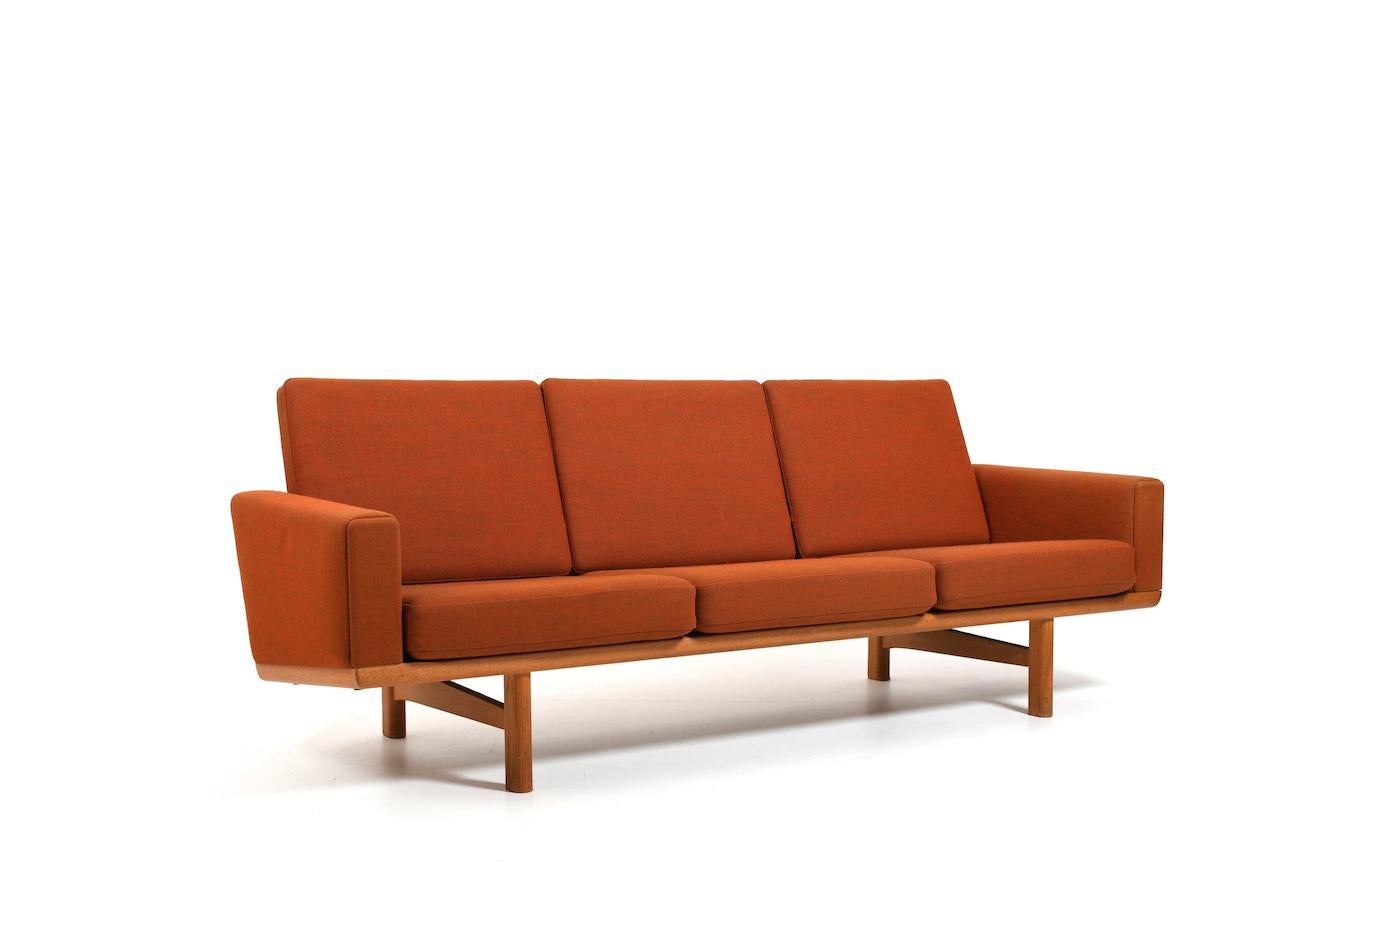 Pair of GE-236 / 3 sofas in solid oak, designed by Hans J. Wegner in 1955. Manufactured by Getama in 1960s. Original cushions and orange/grey wool fabric by Ryghynde Denmark. This set comes from the same house and it´s in very good vintage